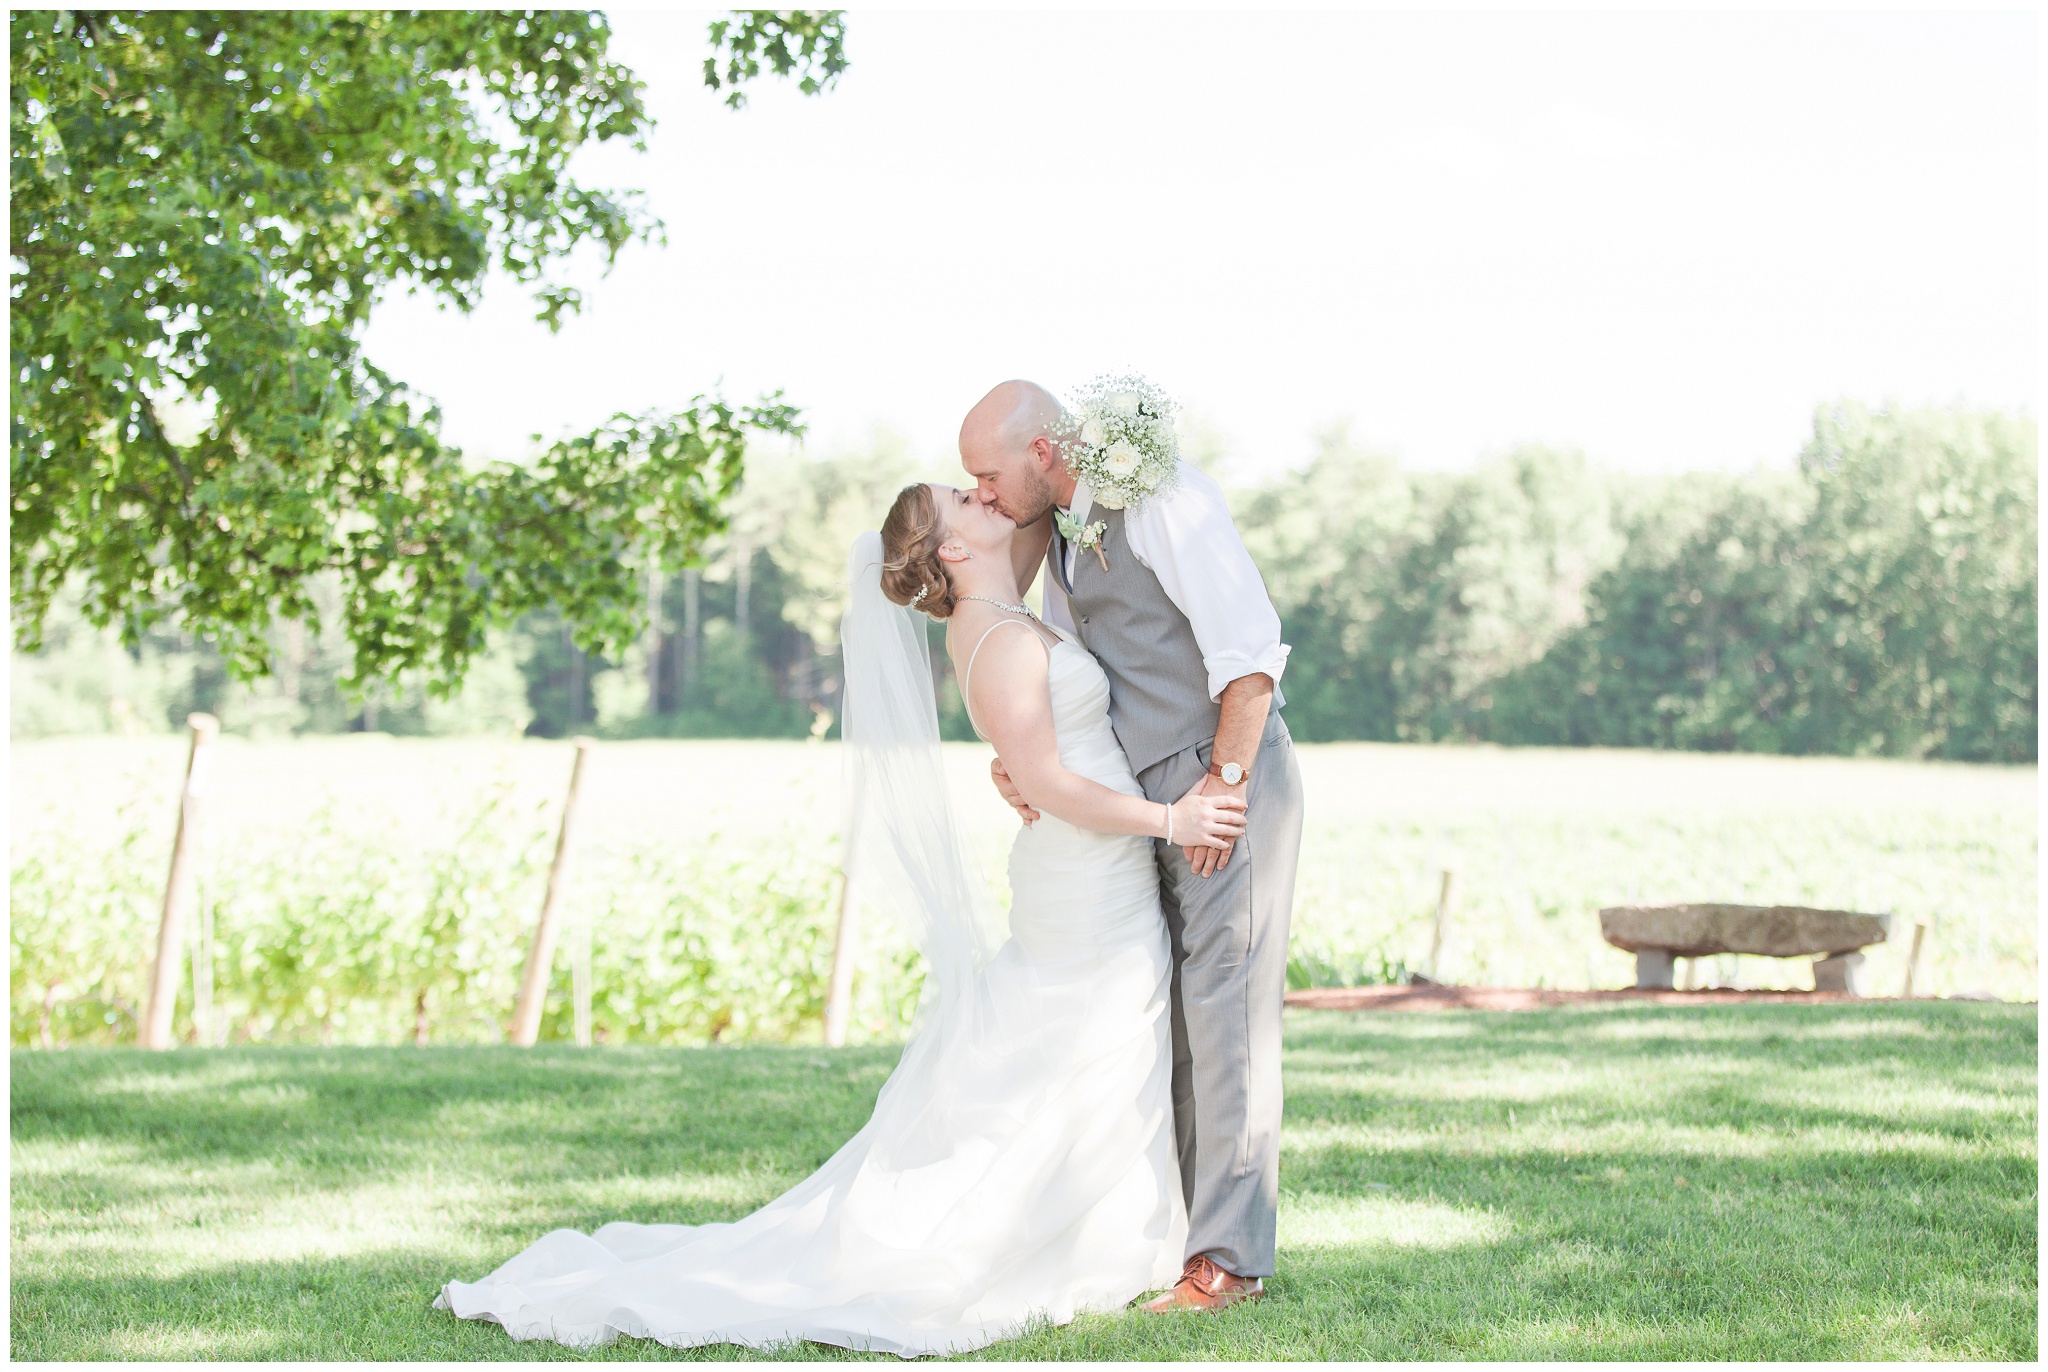 New Hampshire Vineyard Wedding | Amy Brown Photography | Seacoast NH Wedding Photographer | Flag Hill Winery And Distillery